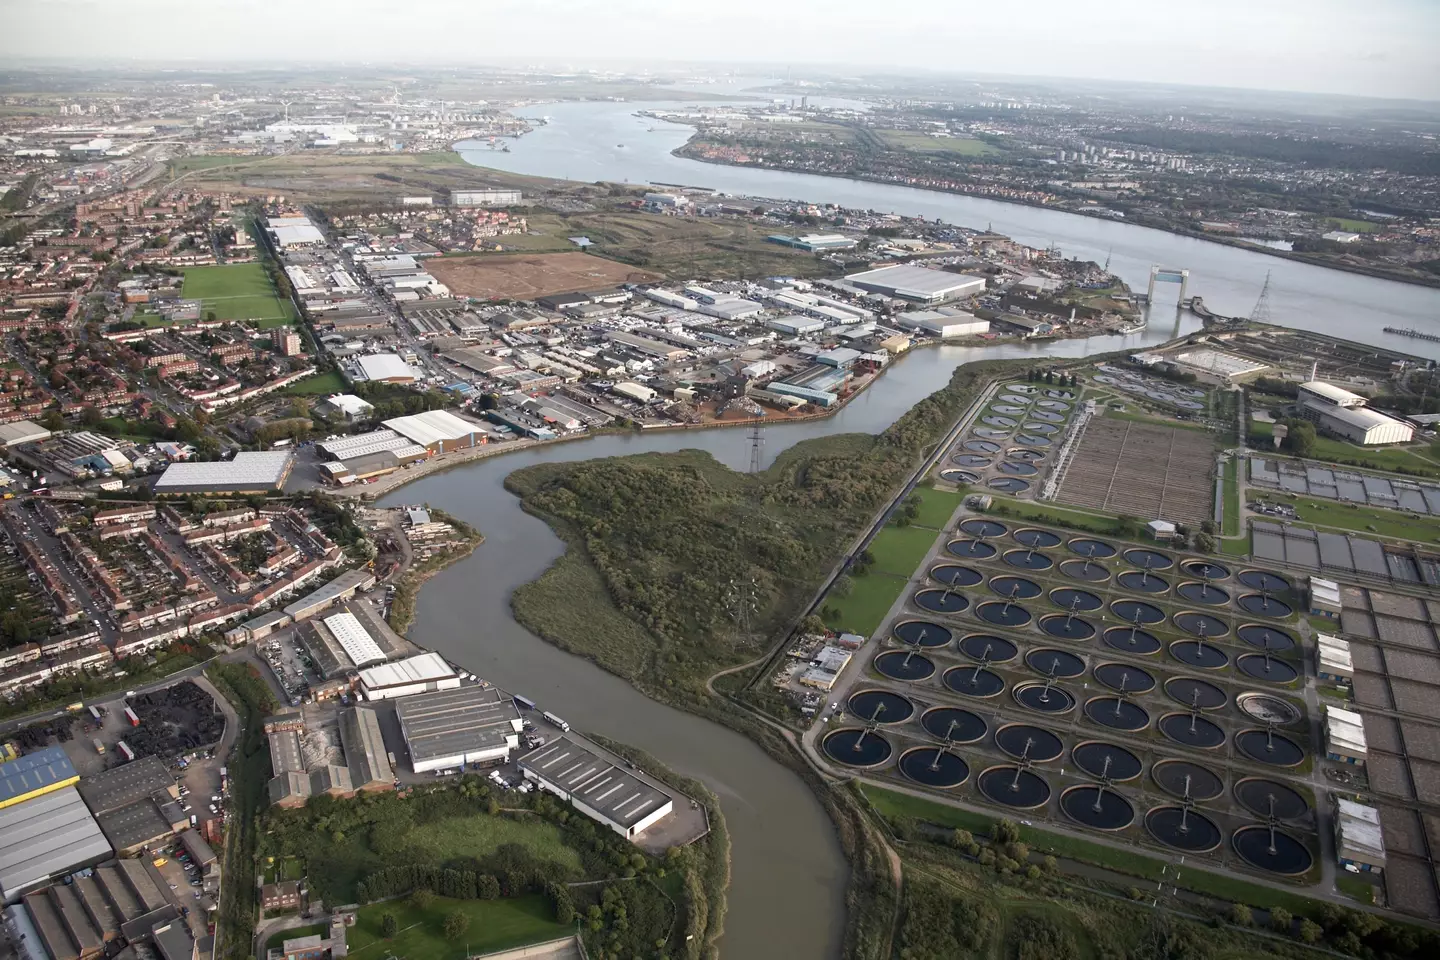 The UKHSA has said waste from the Beckton sewage treatment works in Newham tested positive.